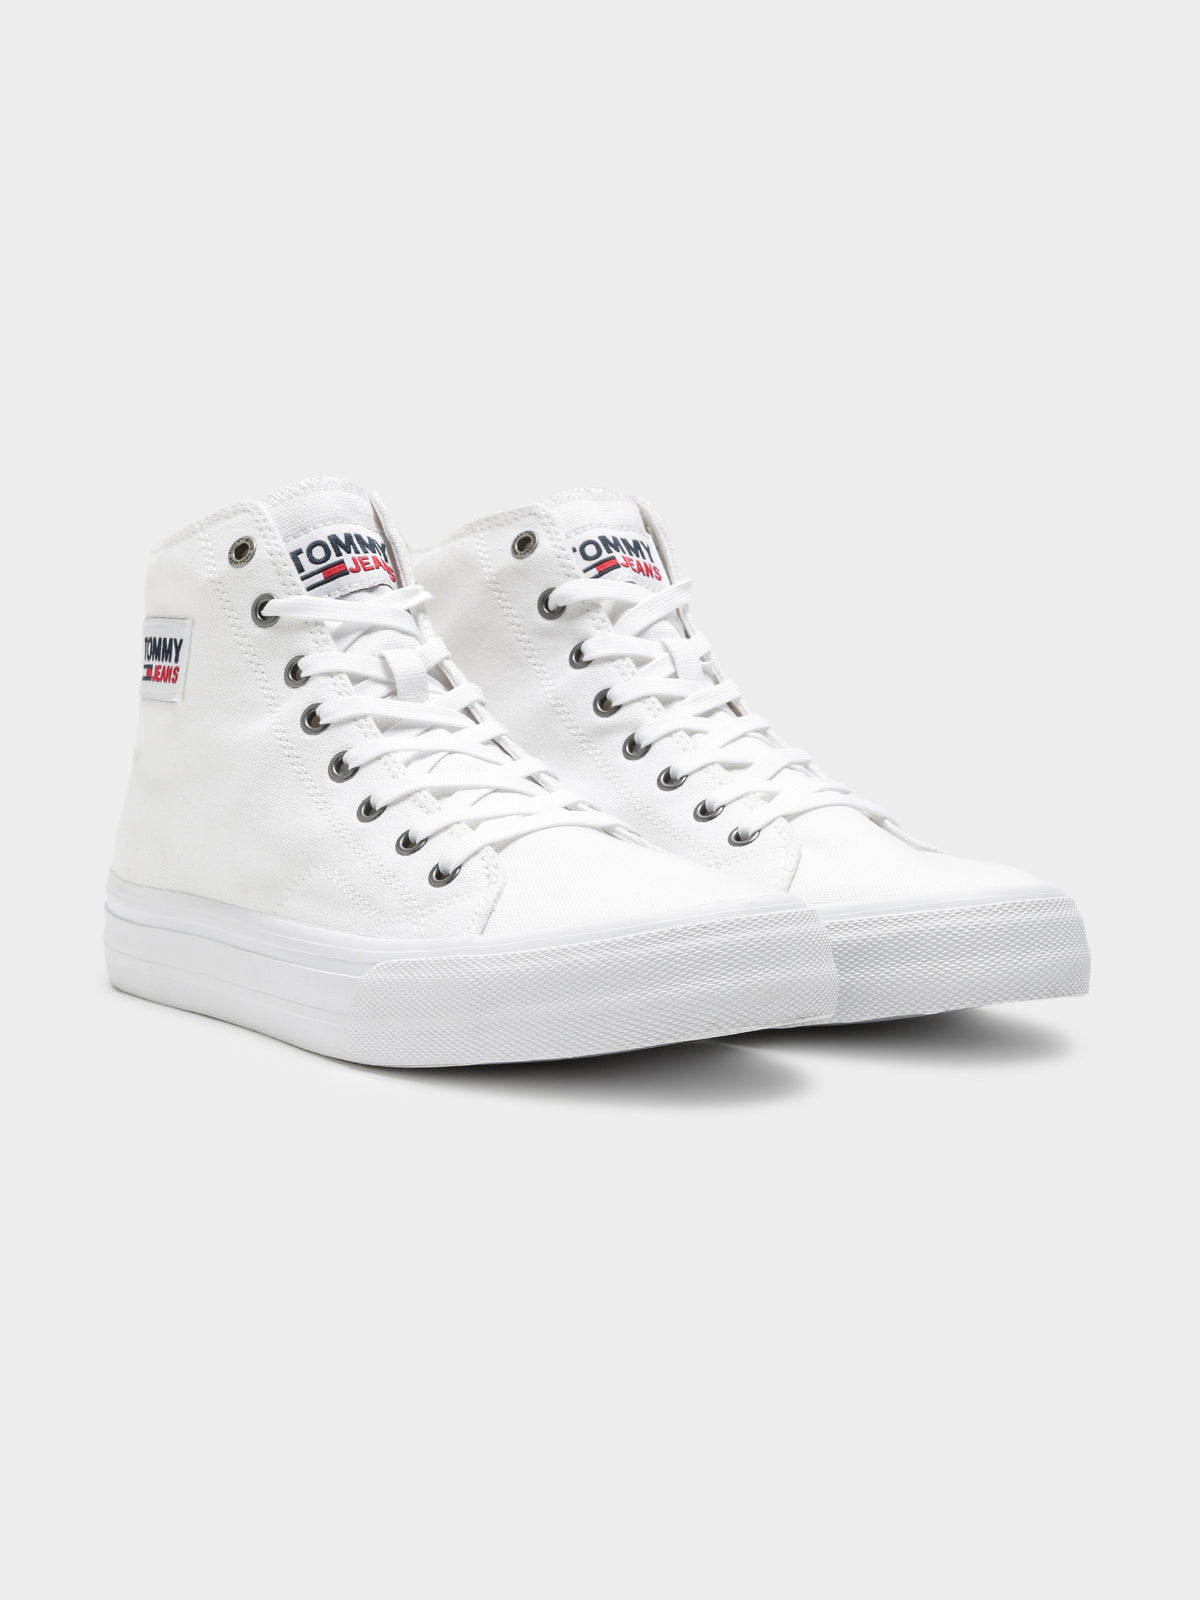 Unisex Mid Cut Lace High Top Sneaker in White